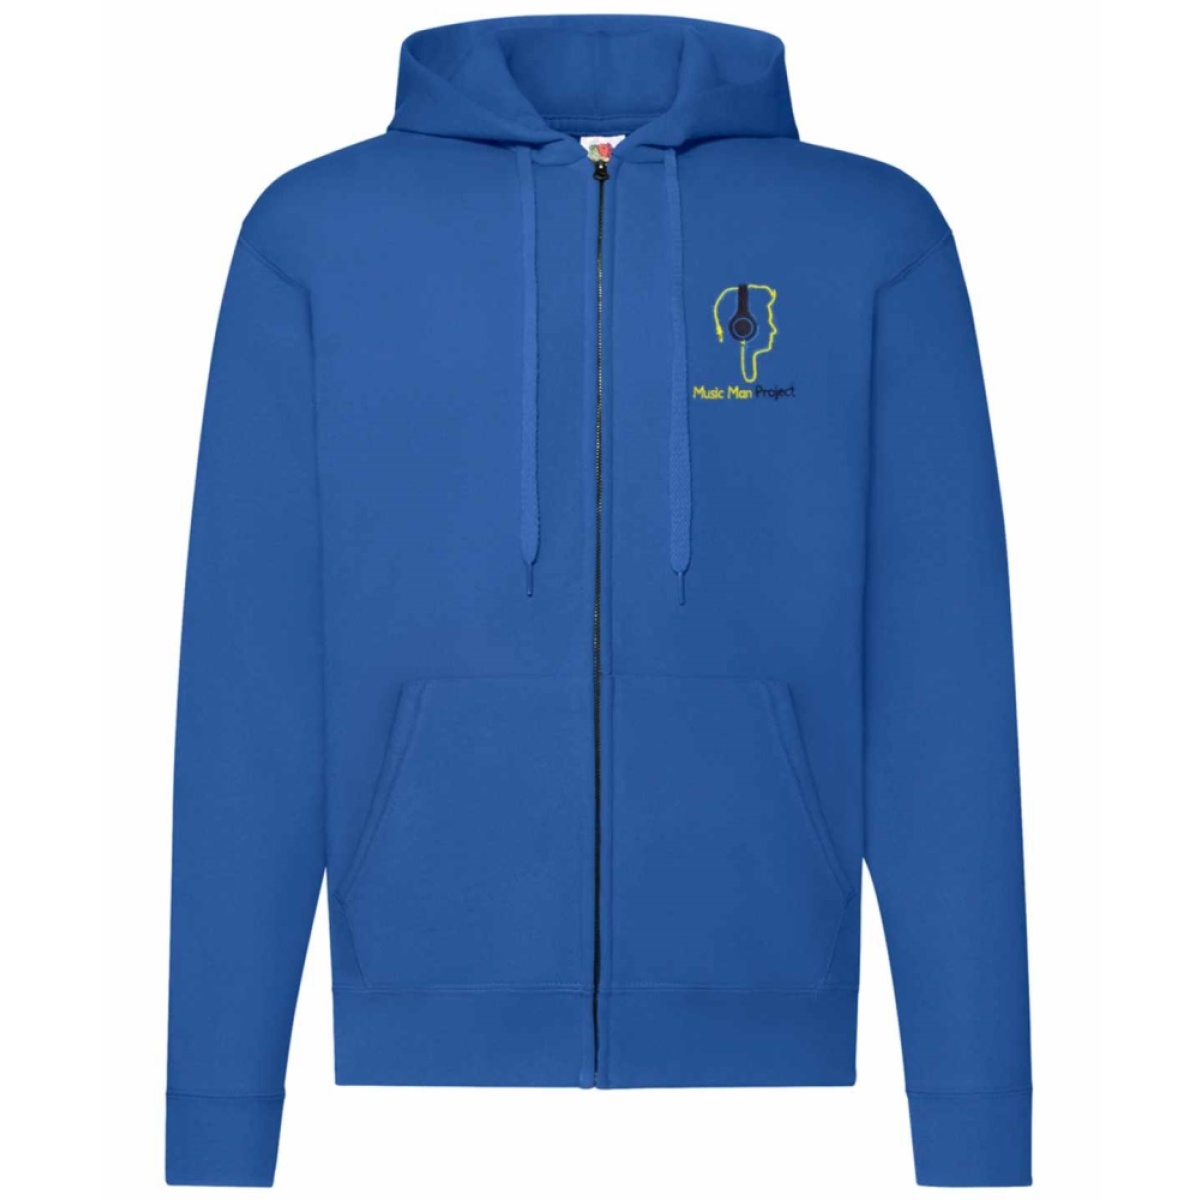 Music Man Project - Essex - Essex Zipped Hoodie, The Music Man Project